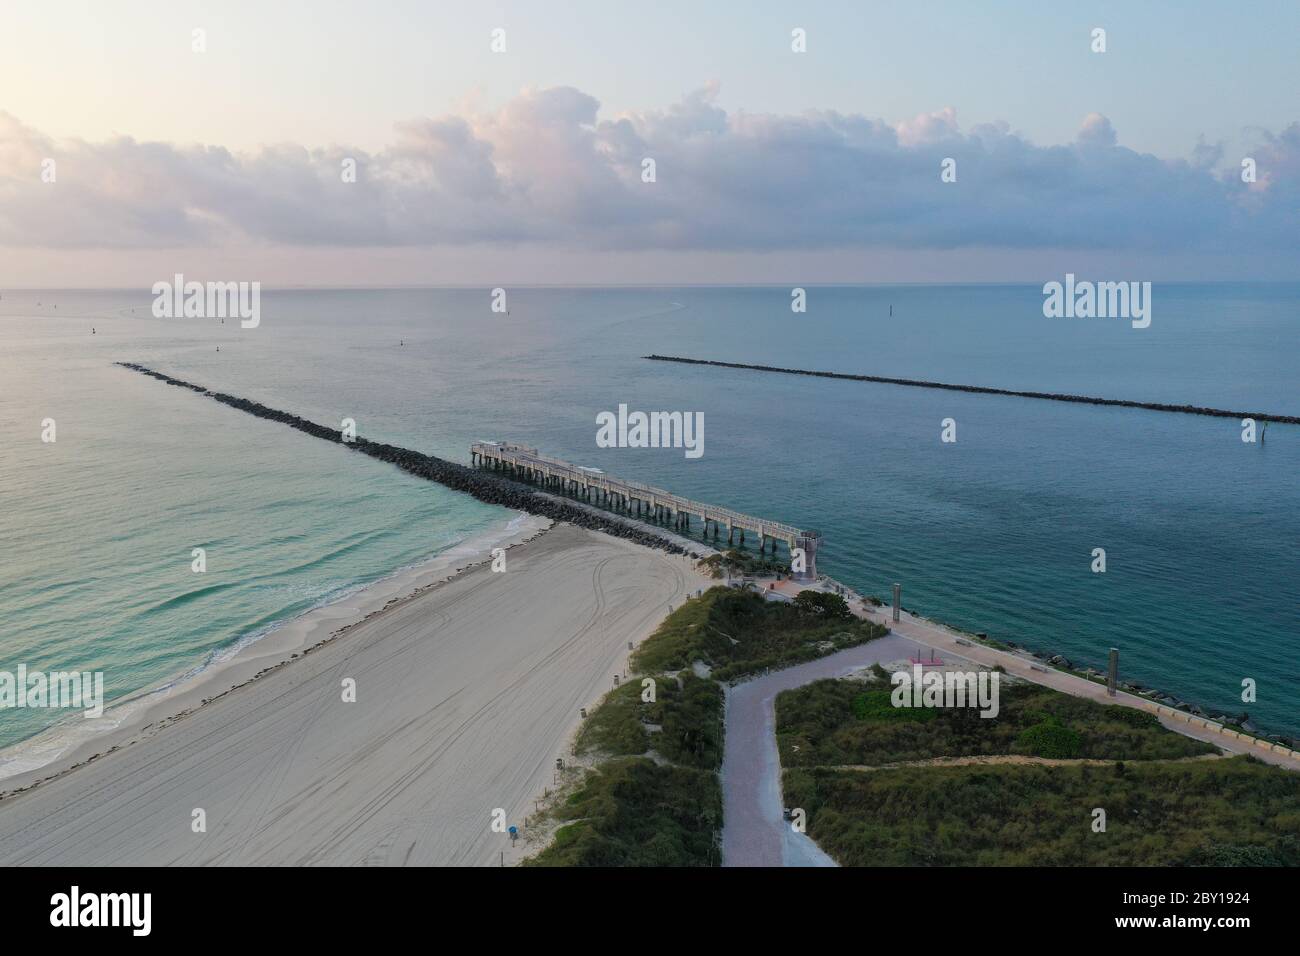 Aerial view of Government Cut and South Pointe Park on Miami Beach, Florida at sunrise in calm weather during COVID-19 shutdown. Stock Photo